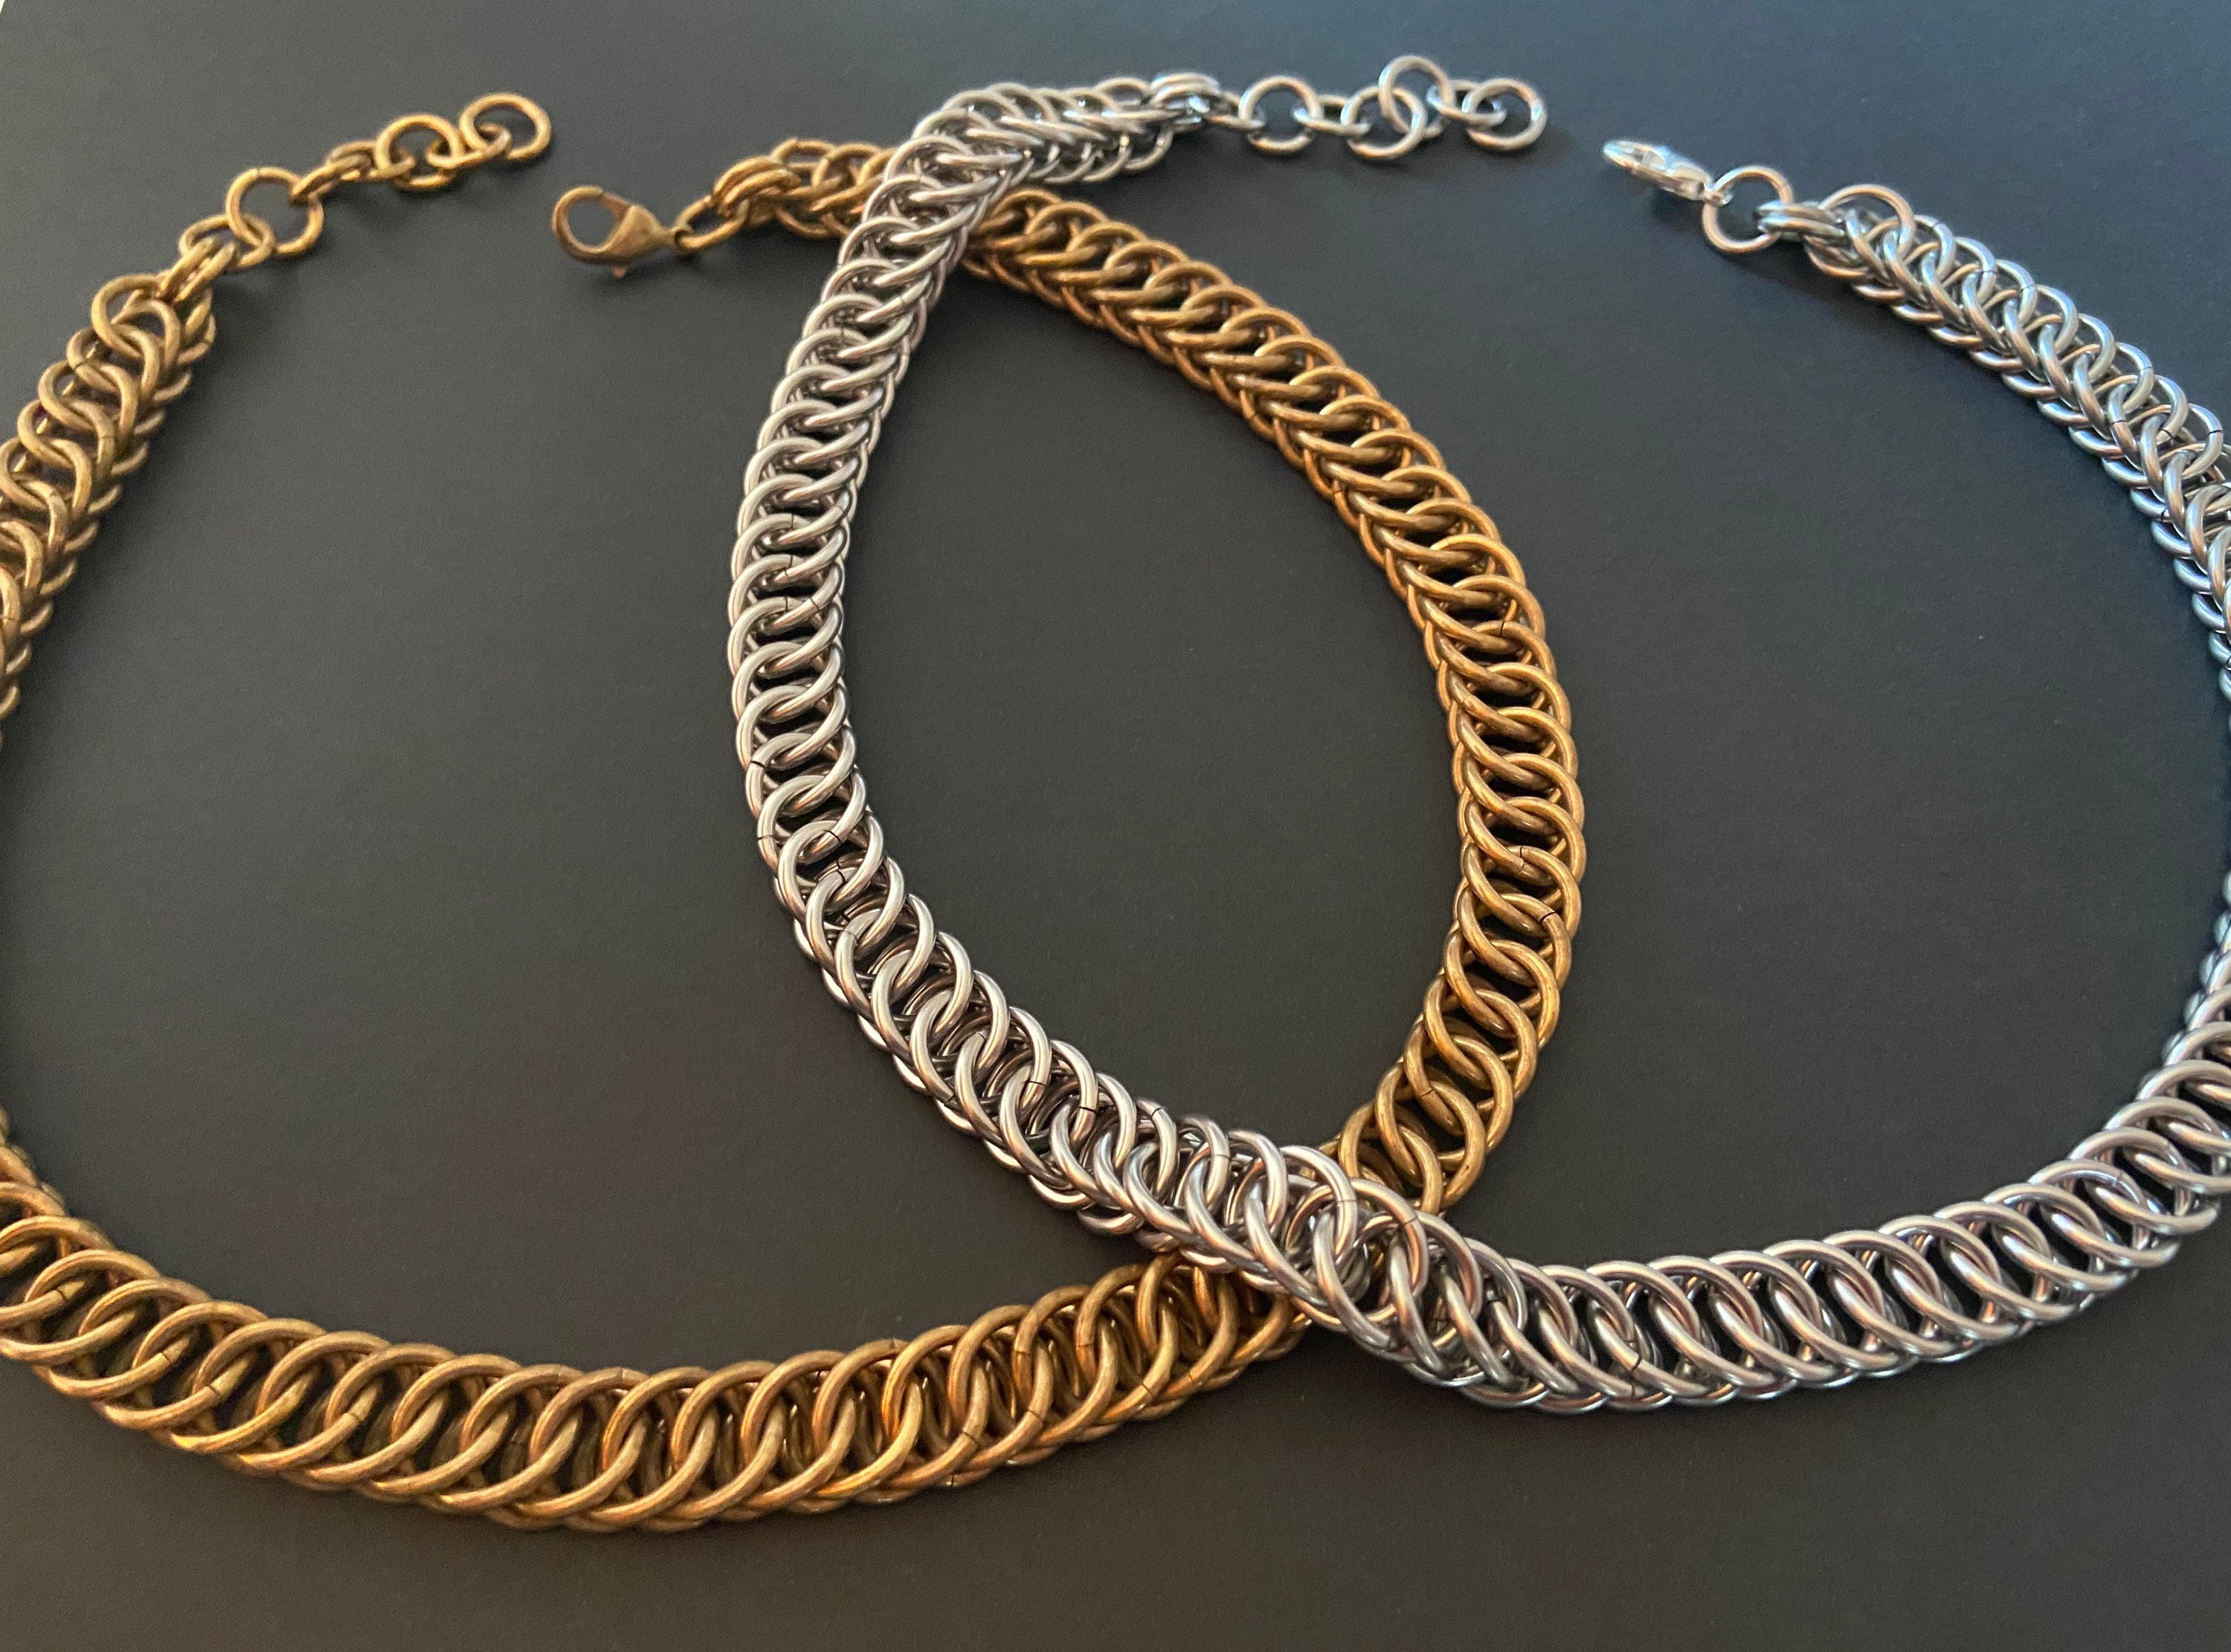 Copper Chainmail Ass Sash / Wallet Chain / Necklace